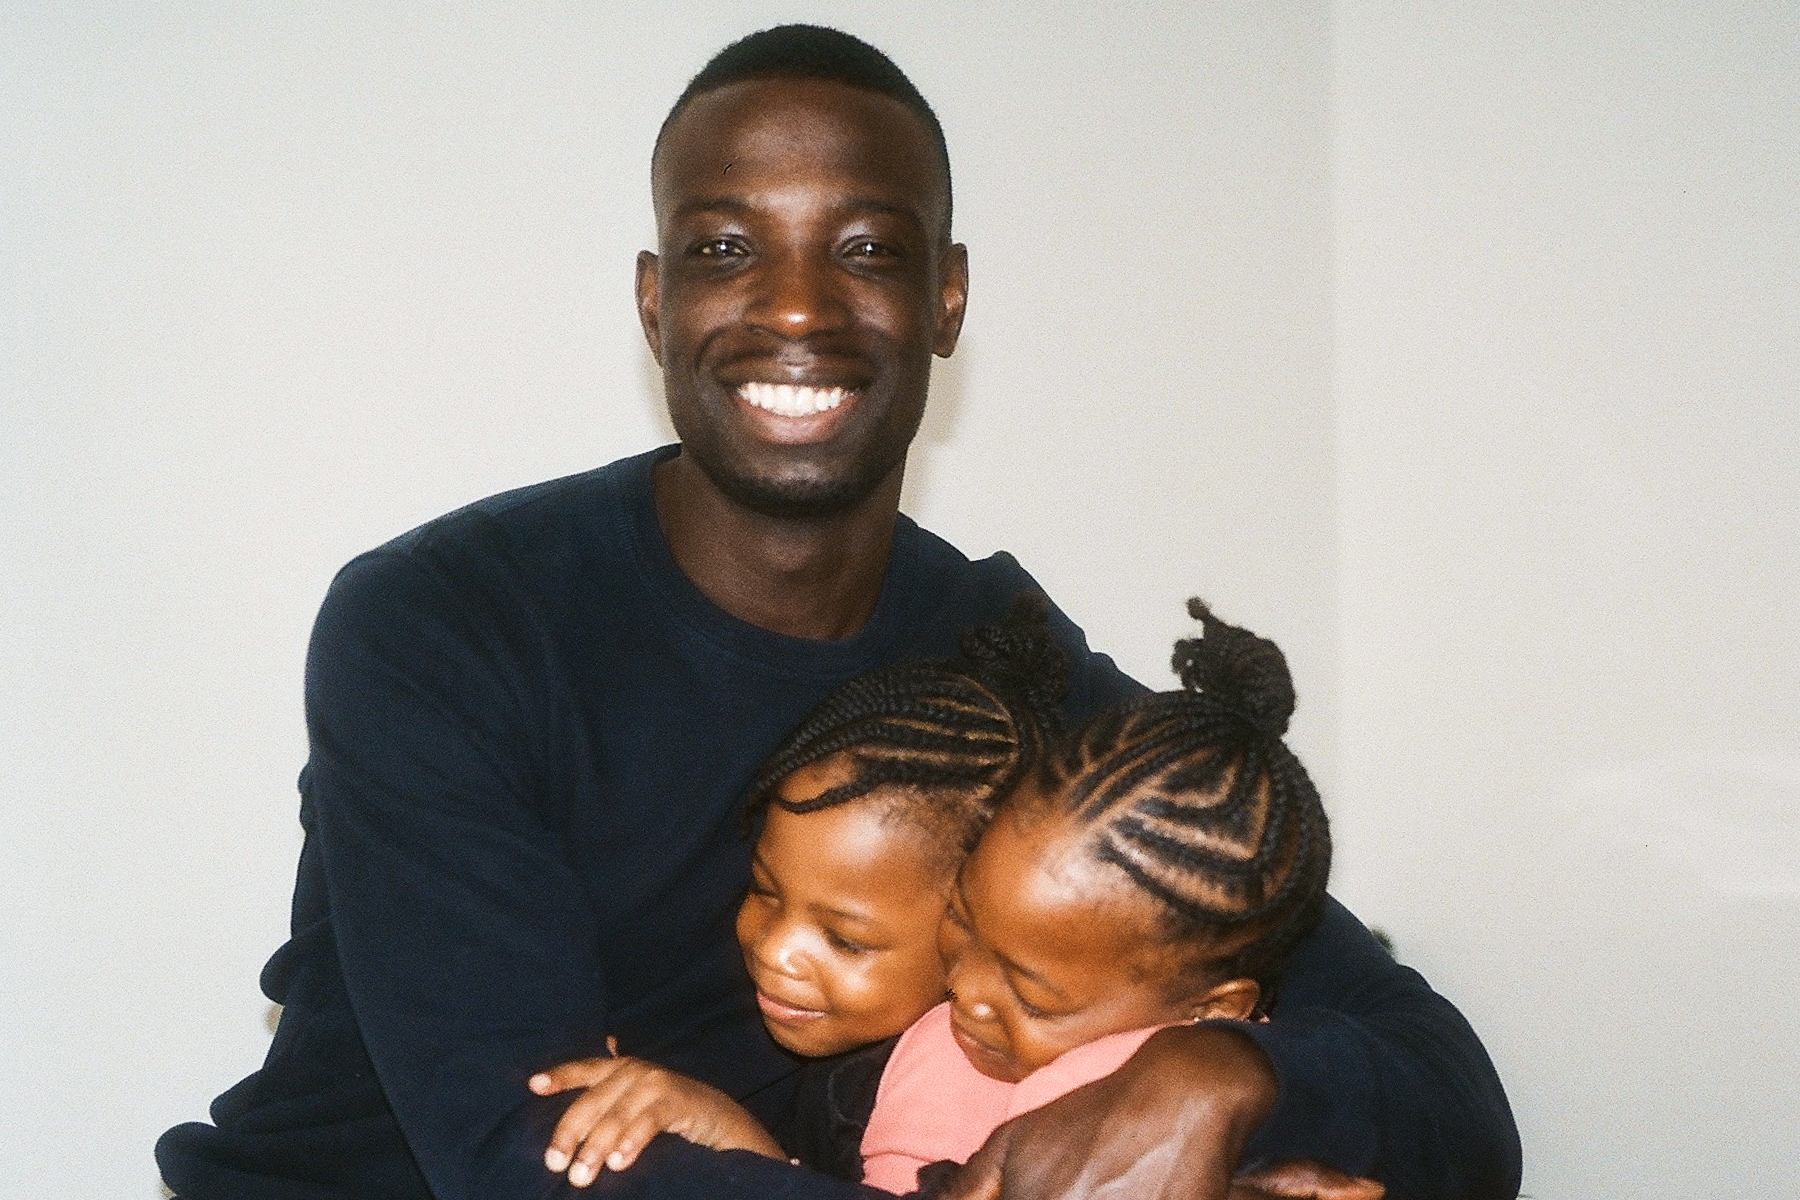 A photo of father Baff smiling and cuddling his two children against a white wall